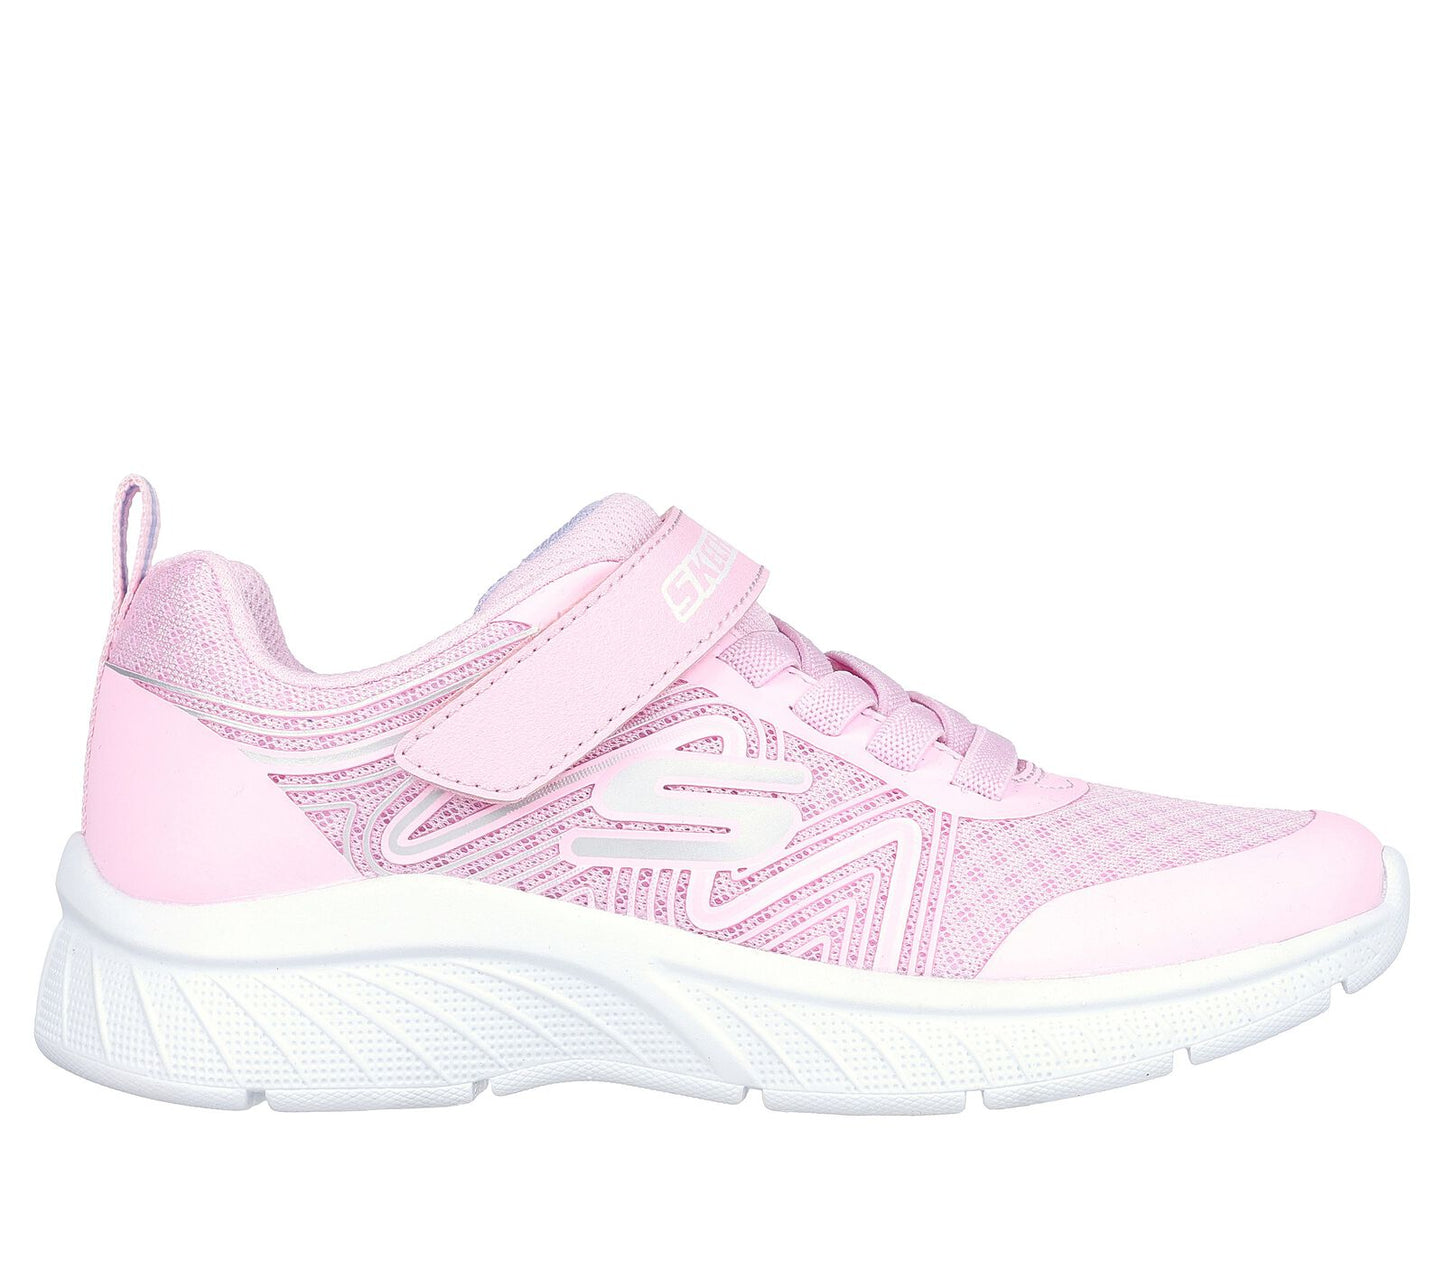 Skechers Swirl Sweet in pink, featuring the Skechers logo. Velcro fastening with flat elastic bungee laces. Right side view.